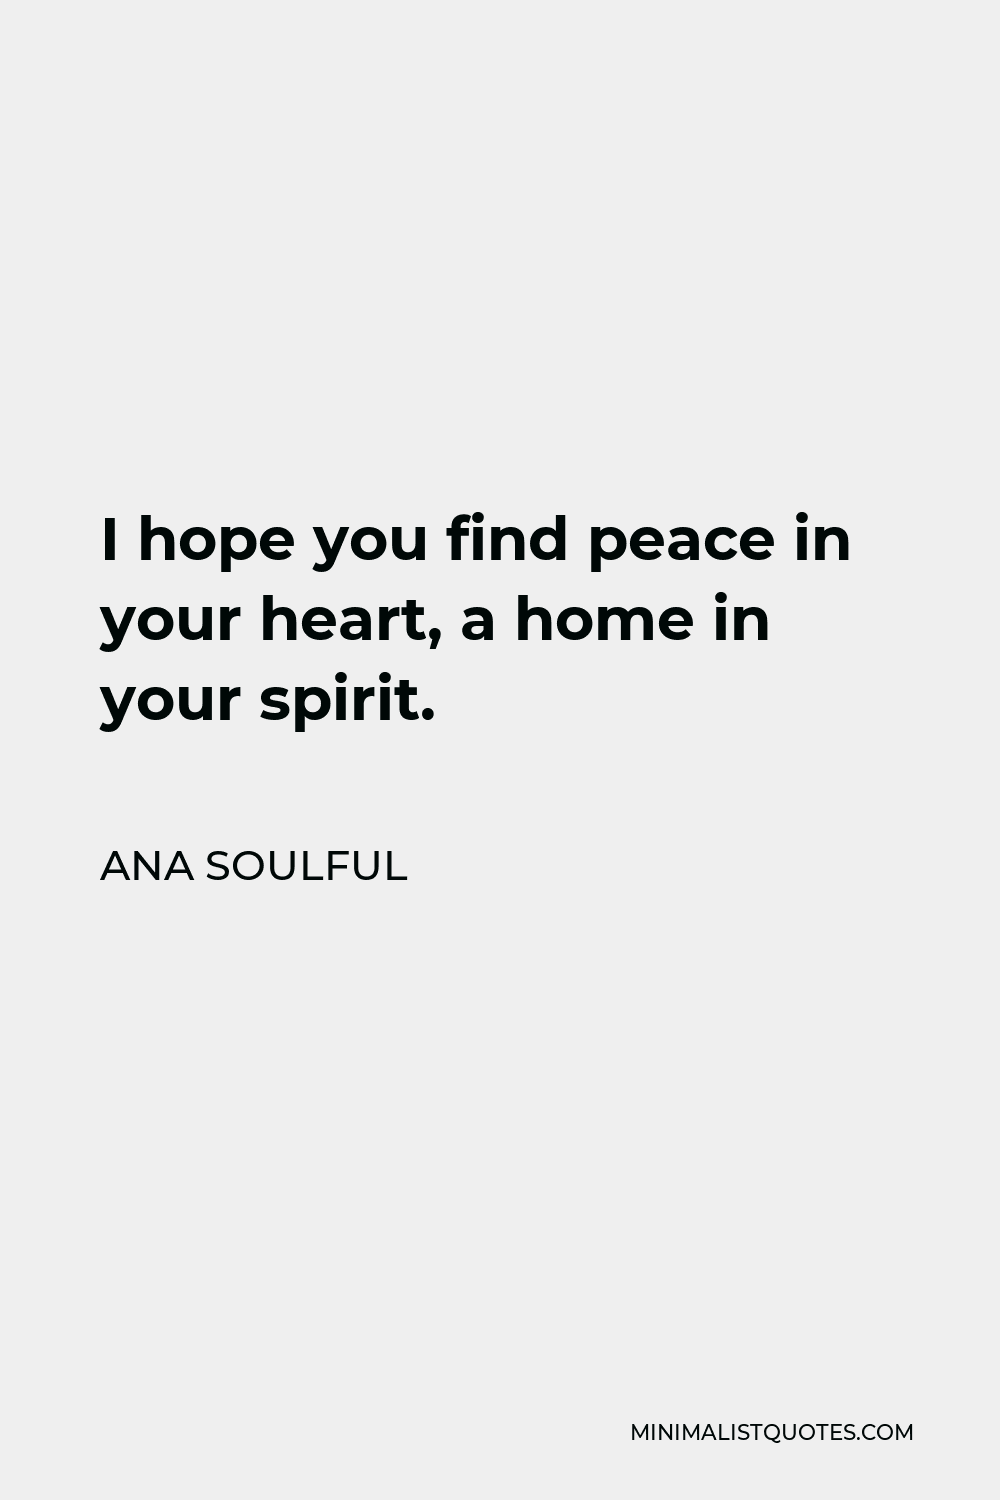 Ana Soulful Quote - I hope you find peace in your heart, a home in your spirit.